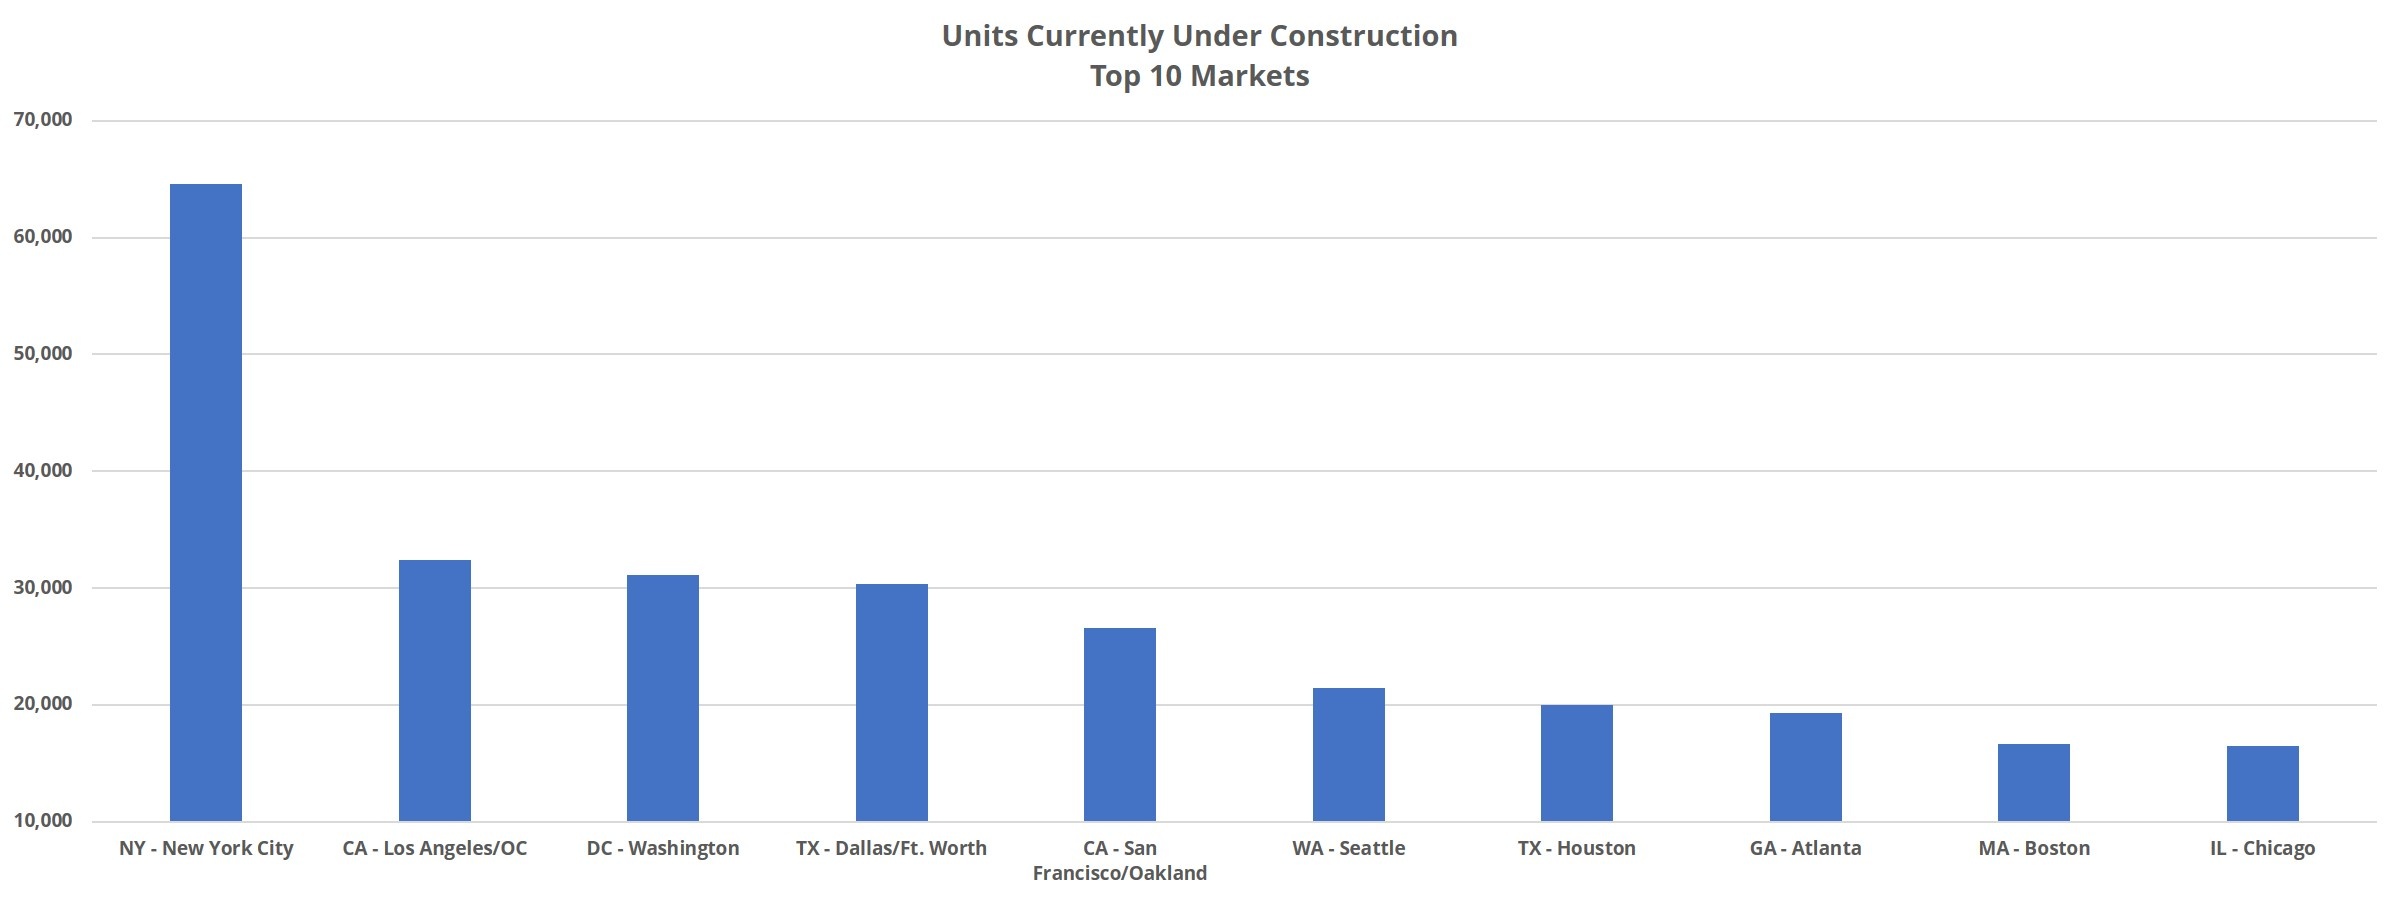 Units Currently Under Construction Top 10 Markets